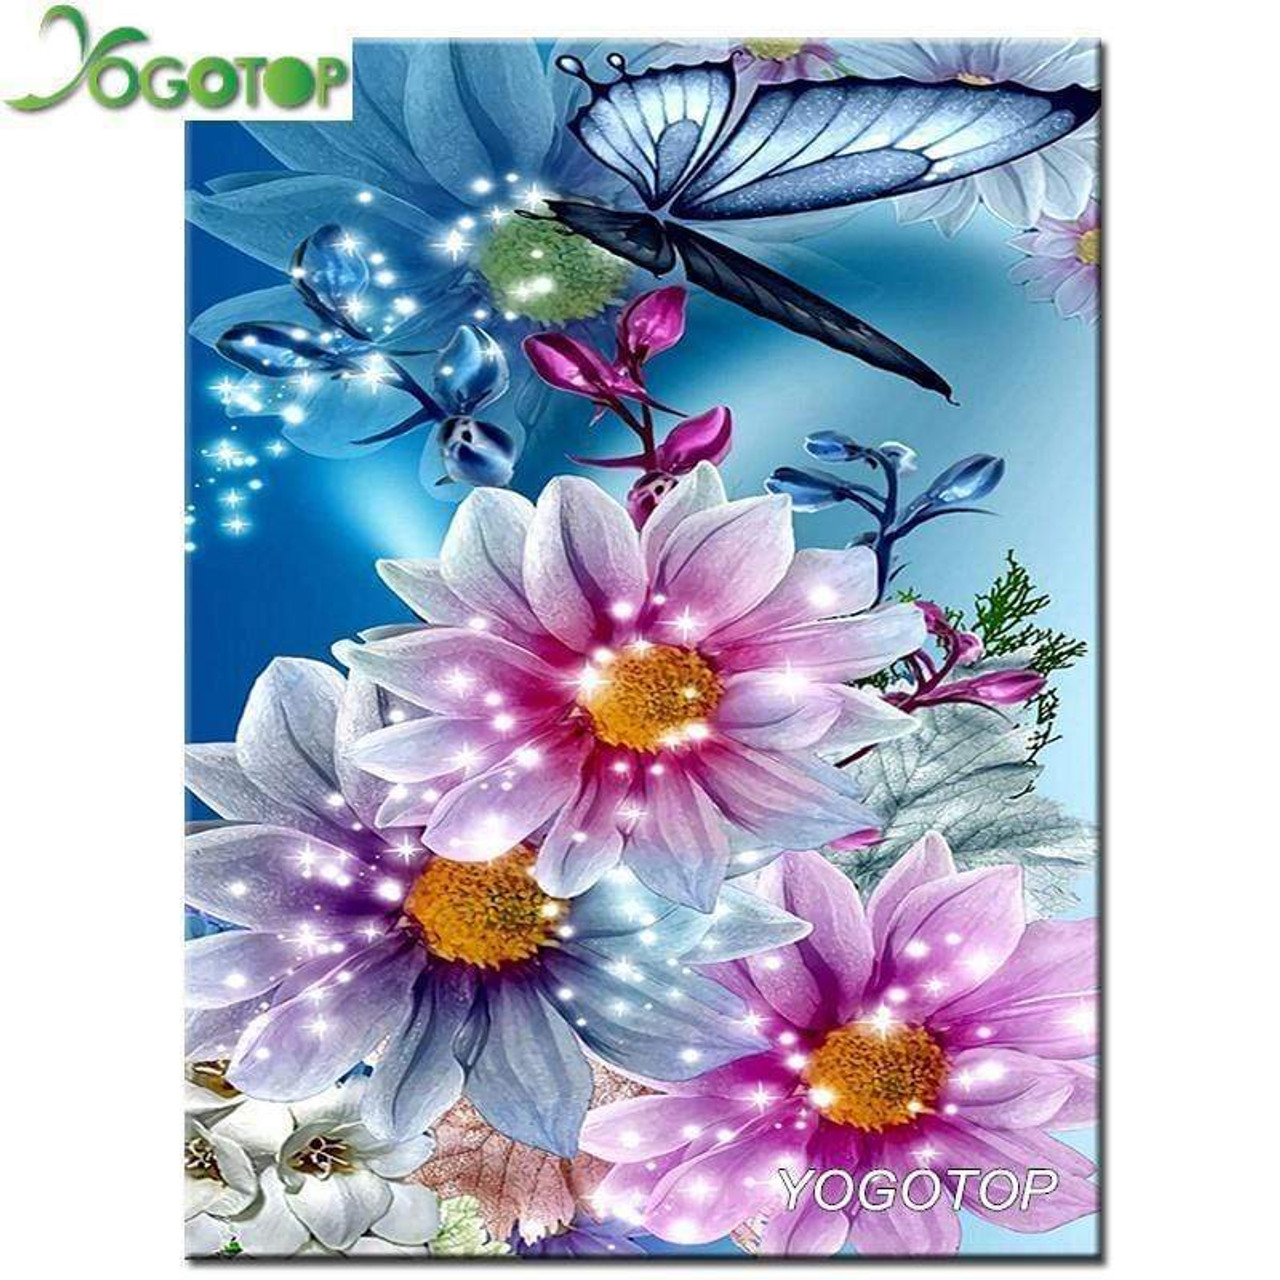 5D Diamond Painting Flowers and Butterflies Kit